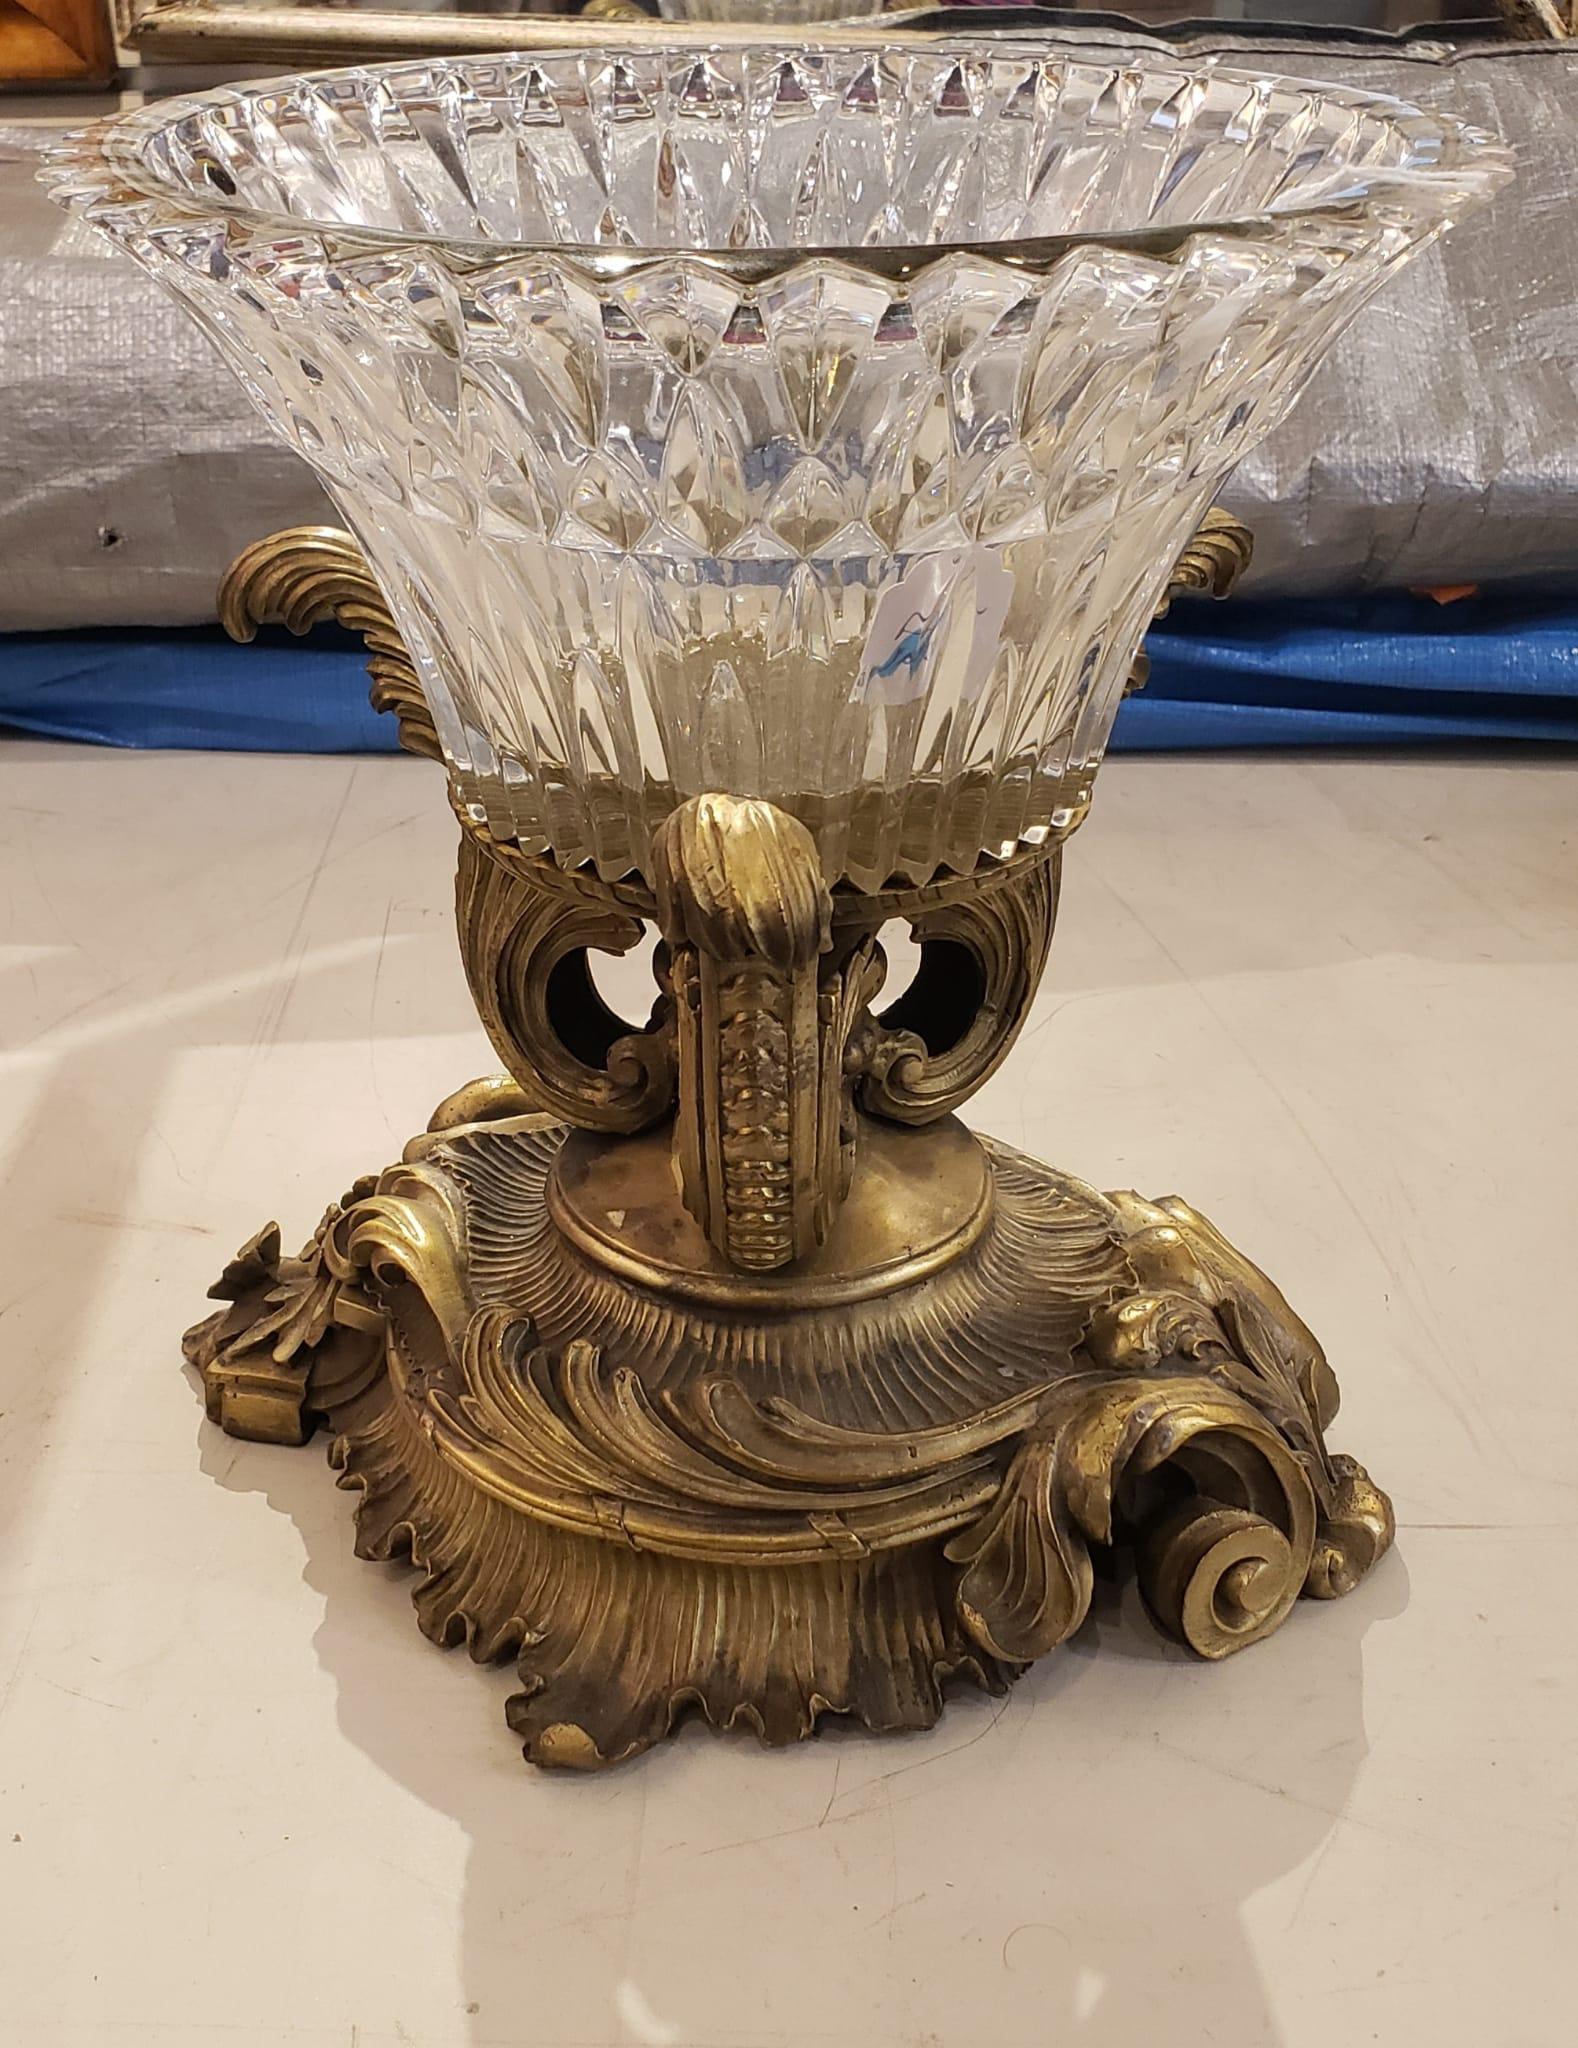 20th Century Rococo Style Molded Glass Mounted Patinated Metal and Brass Centerpiece For Sale